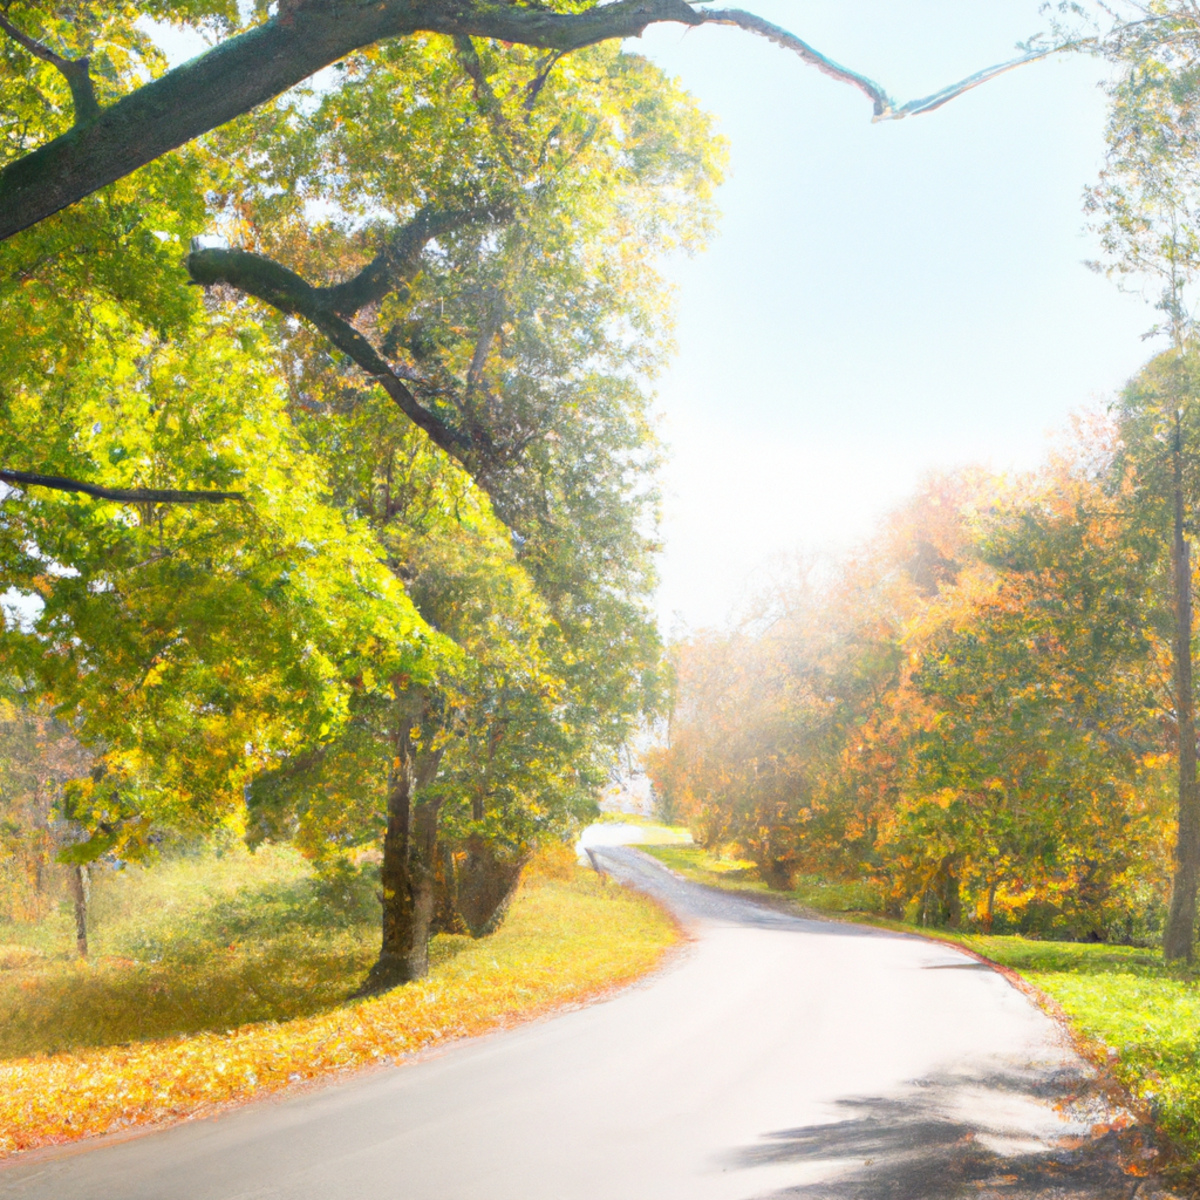 Serene countryside road with autumn leaves, symbolizing the challenging journey of living with Pancreatic Neuroendocrine Tumors (PNETs).